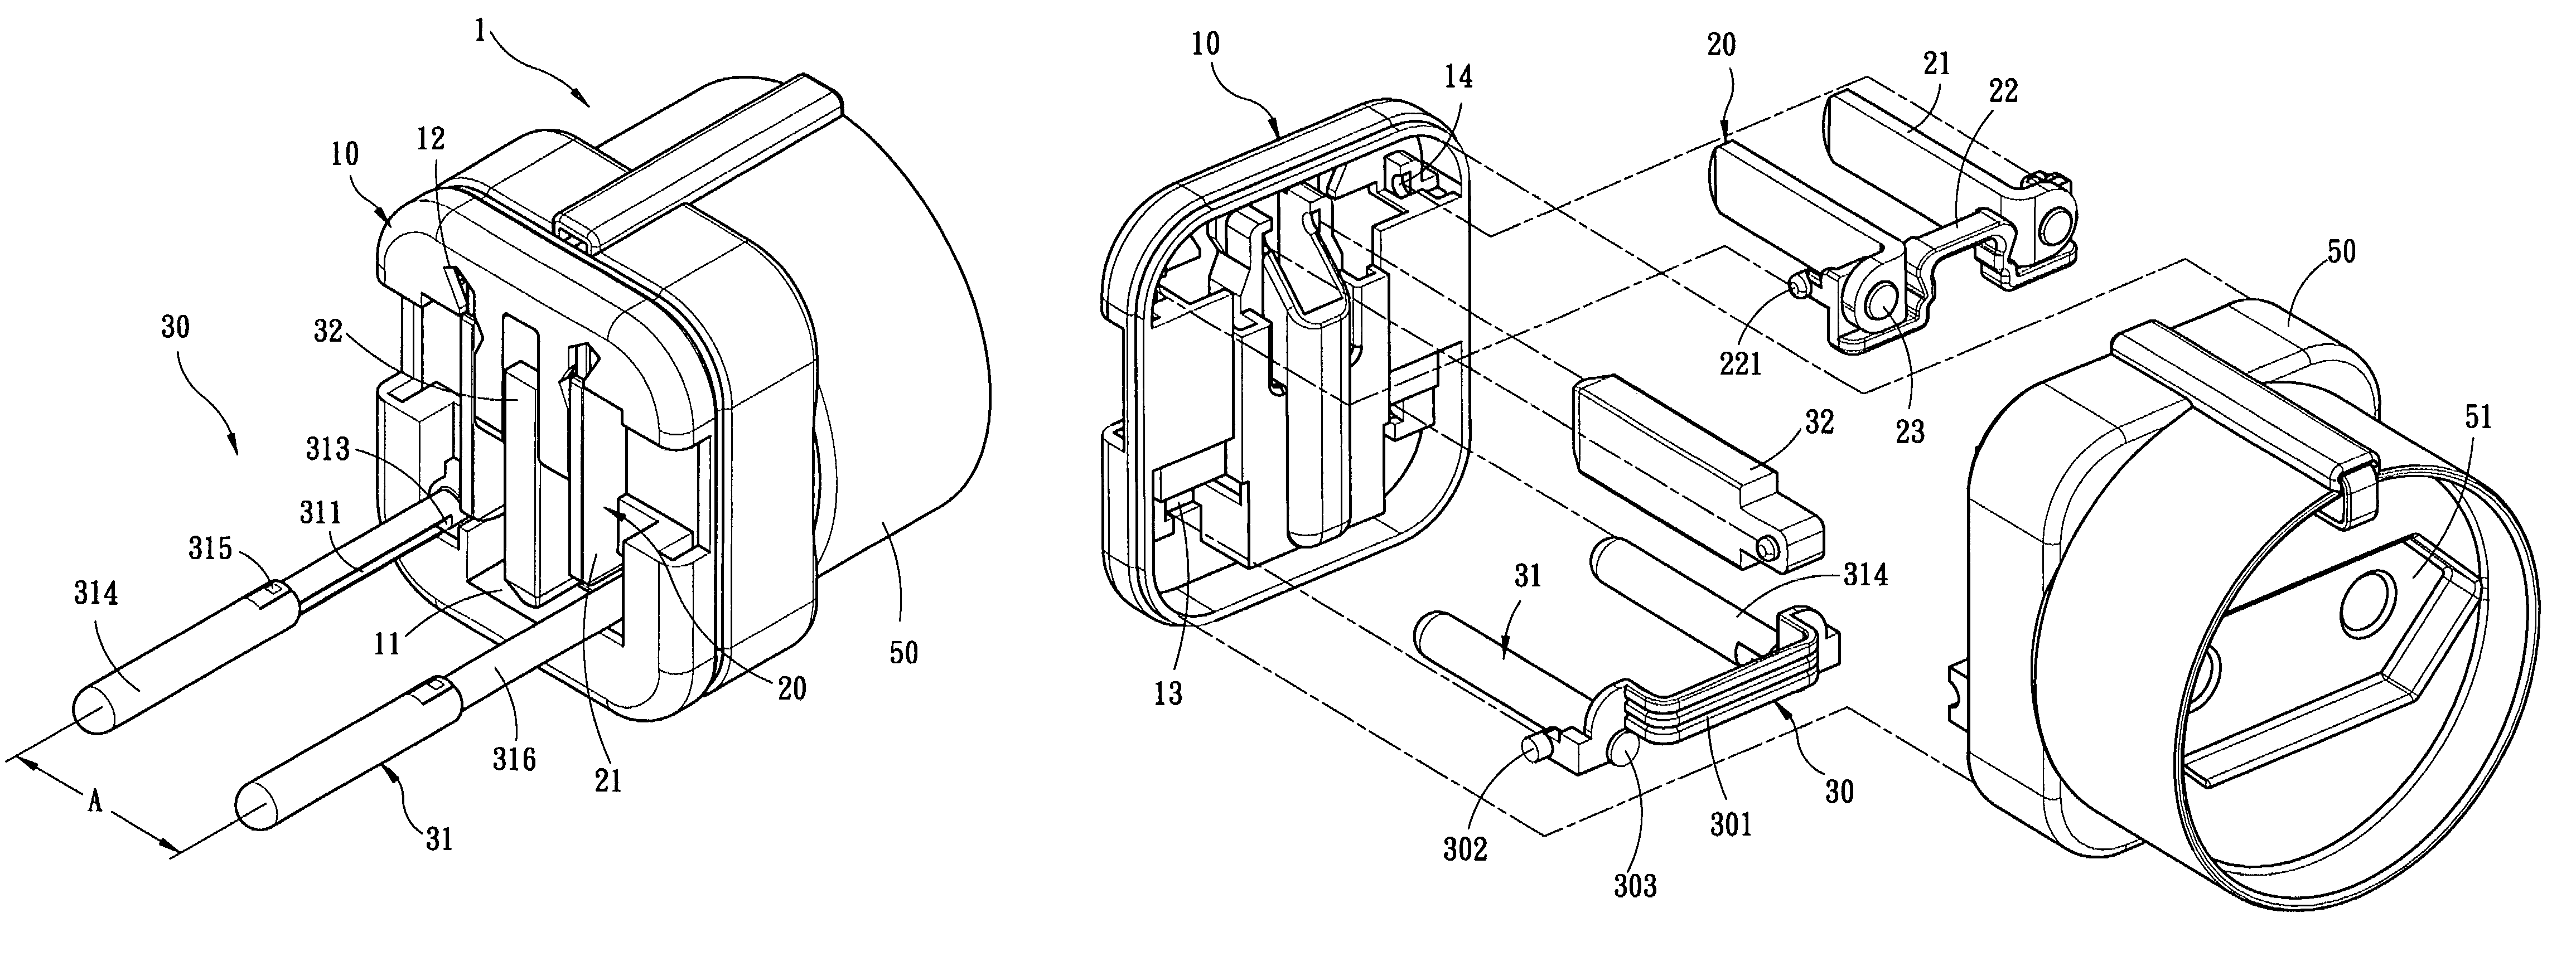 Adapter for connectors